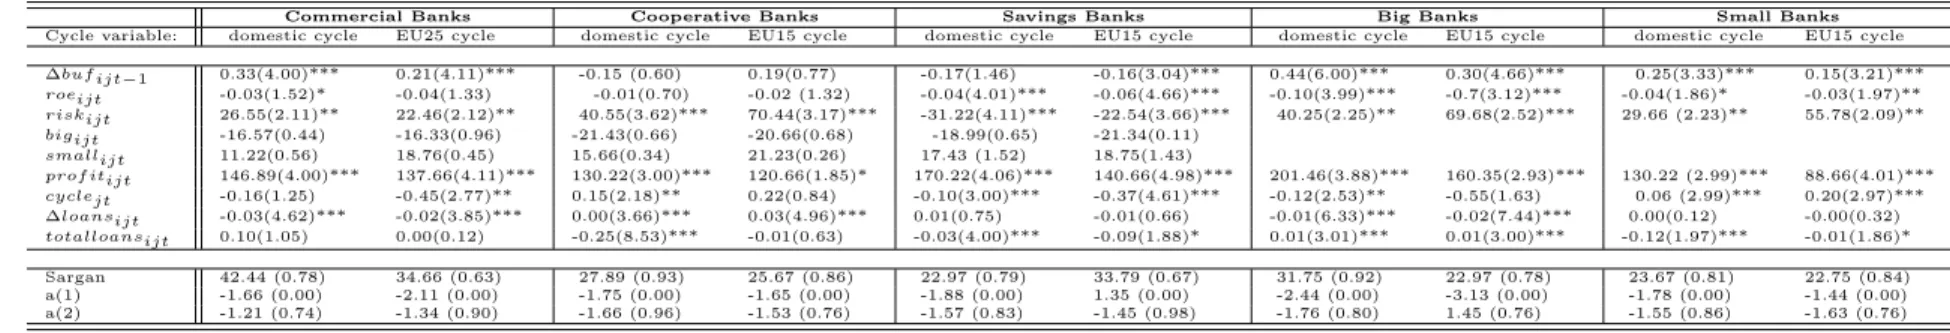 Table 3.7: Two Step GMM Estimates (by bank size).